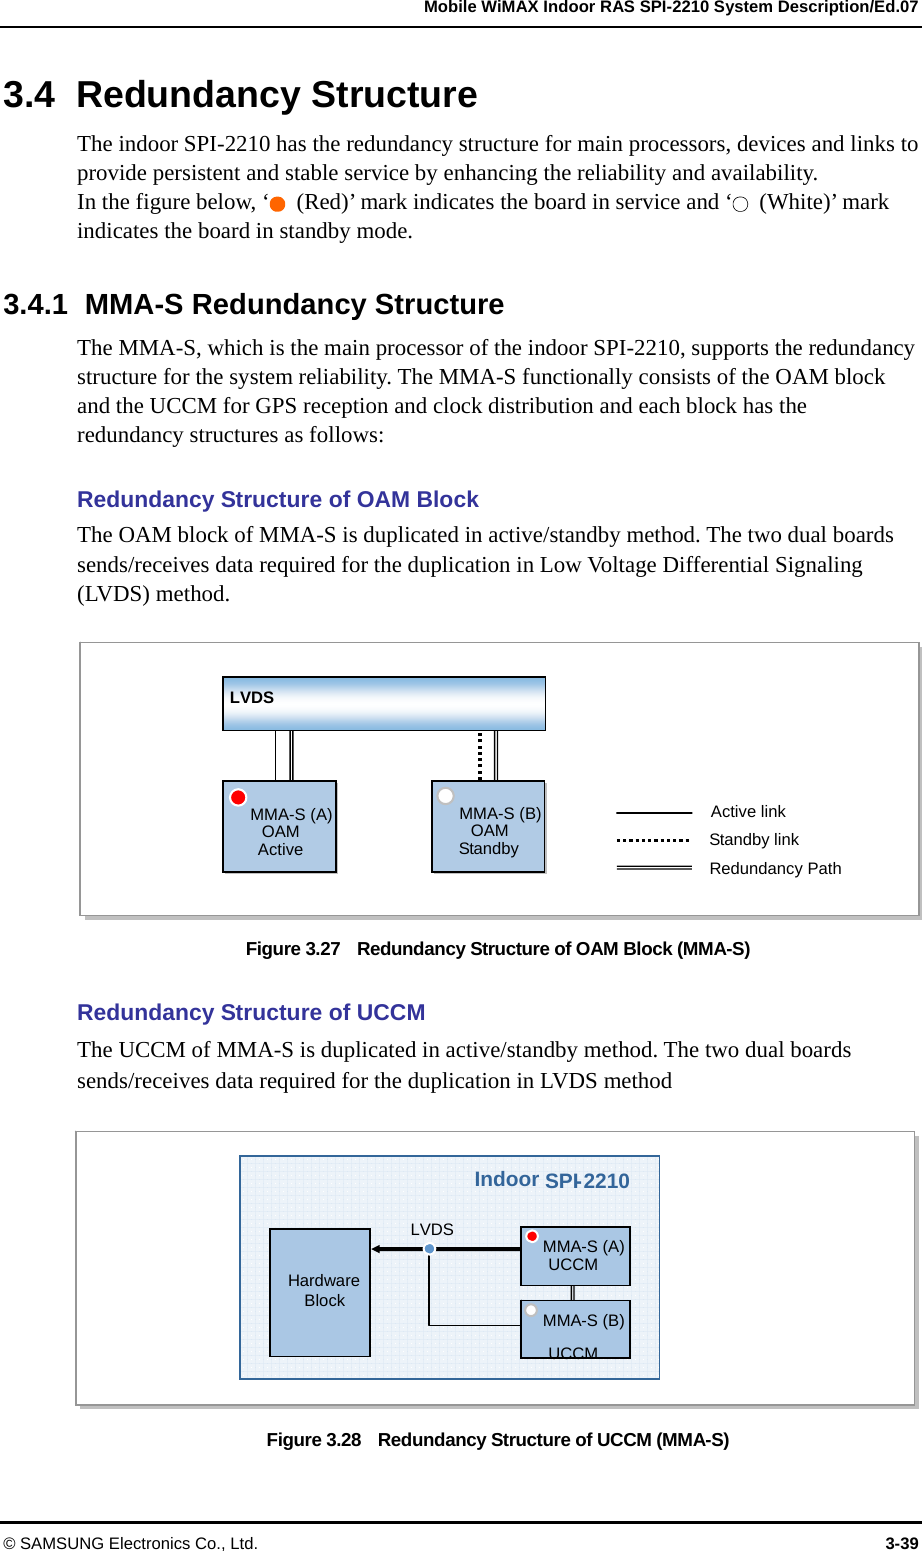   Mobile WiMAX Indoor RAS SPI-2210 System Description/Ed.07 © SAMSUNG Electronics Co., Ltd.  3-39 3.4 Redundancy Structure The indoor SPI-2210 has the redundancy structure for main processors, devices and links to provide persistent and stable service by enhancing the reliability and availability. In the figure below, ‘  (Red)’ mark indicates the board in service and ‘  (White)’ mark indicates the board in standby mode.    3.4.1  MMA-S Redundancy Structure The MMA-S, which is the main processor of the indoor SPI-2210, supports the redundancy structure for the system reliability. The MMA-S functionally consists of the OAM block and the UCCM for GPS reception and clock distribution and each block has the redundancy structures as follows:  Redundancy Structure of OAM Block The OAM block of MMA-S is duplicated in active/standby method. The two dual boards sends/receives data required for the duplication in Low Voltage Differential Signaling (LVDS) method.  Figure 3.27    Redundancy Structure of OAM Block (MMA-S)  Redundancy Structure of UCCM The UCCM of MMA-S is duplicated in active/standby method. The two dual boards sends/receives data required for the duplication in LVDS method  Figure 3.28    Redundancy Structure of UCCM (MMA-S) Redundancy PathActive linkStandby linkMMA-S (B)OAMStandbyMMA-S (A) OAM Active LVDS IndoorSPI-2210하드웨어블록 HardwareBlockLVDS MMA-S (A)UCCMMMA-S (B)UCCM